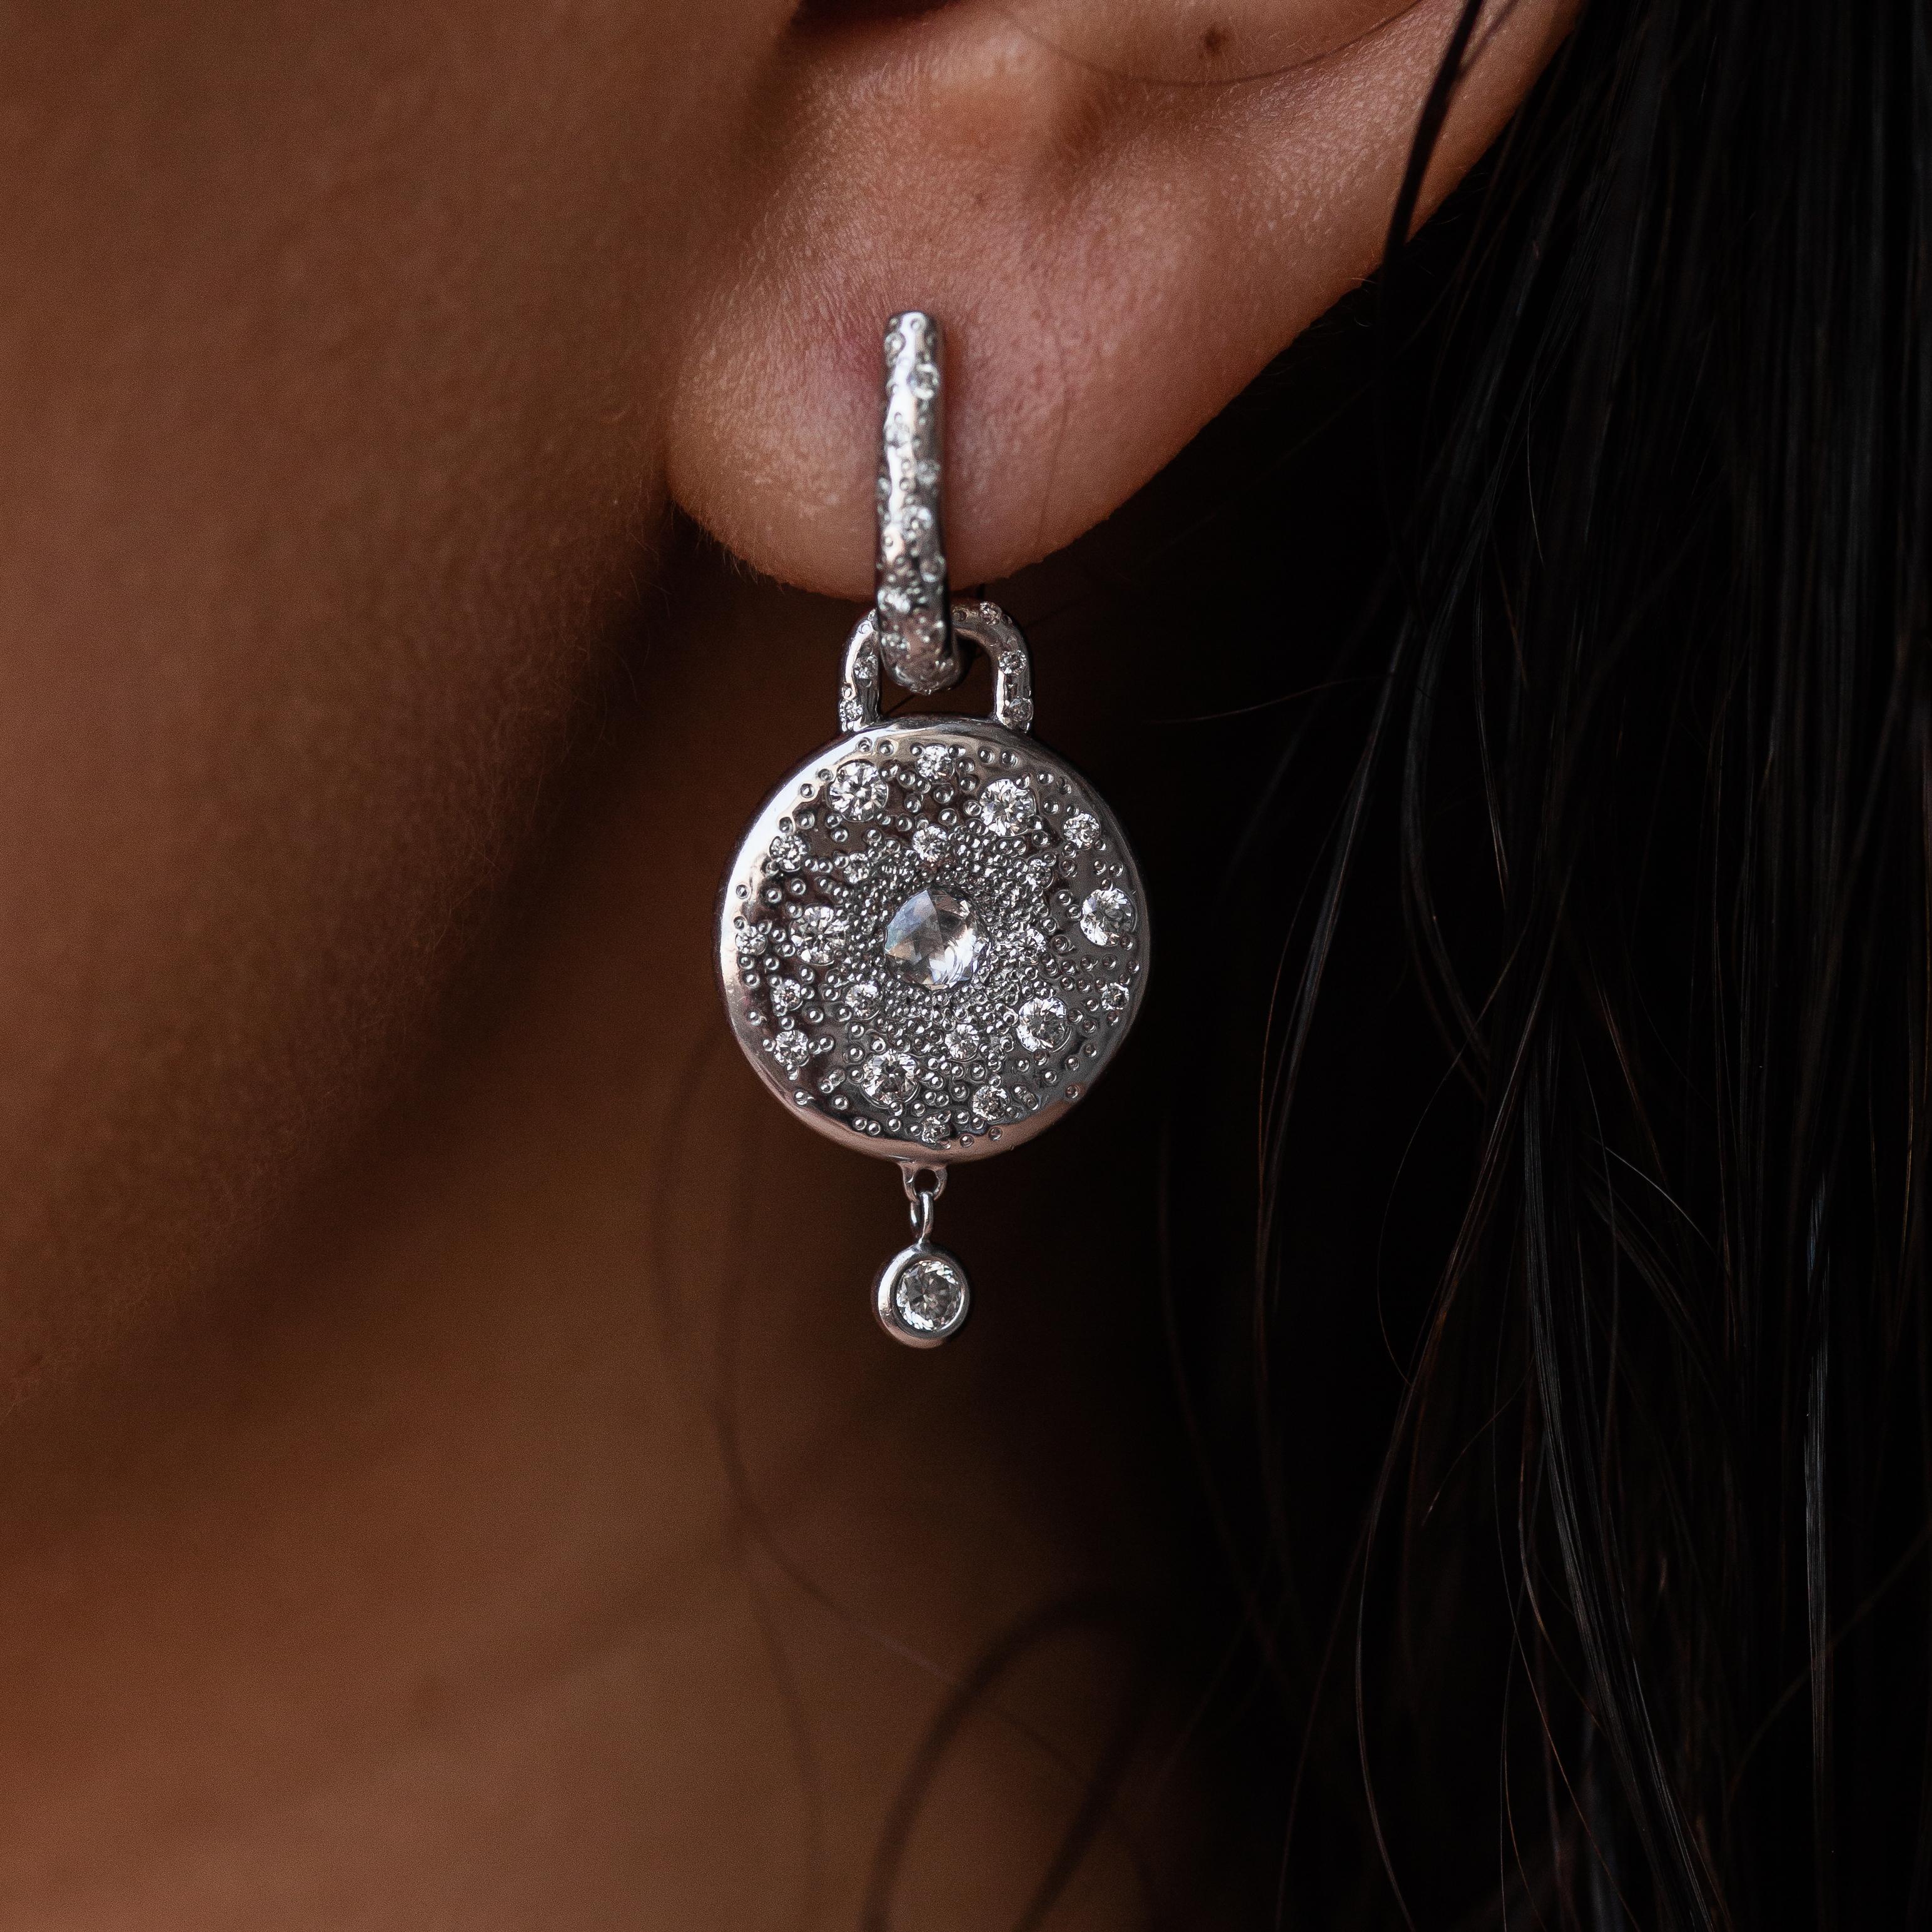 This 18K white gold elegant drop earrings are from our Sirène collection. These drop earrings are decorated with colorless diamonds in total of 1.21 Carat. Total metal weight is 11.30 gr. They are 3cm long. Pure elegance!

The Sirène collection is